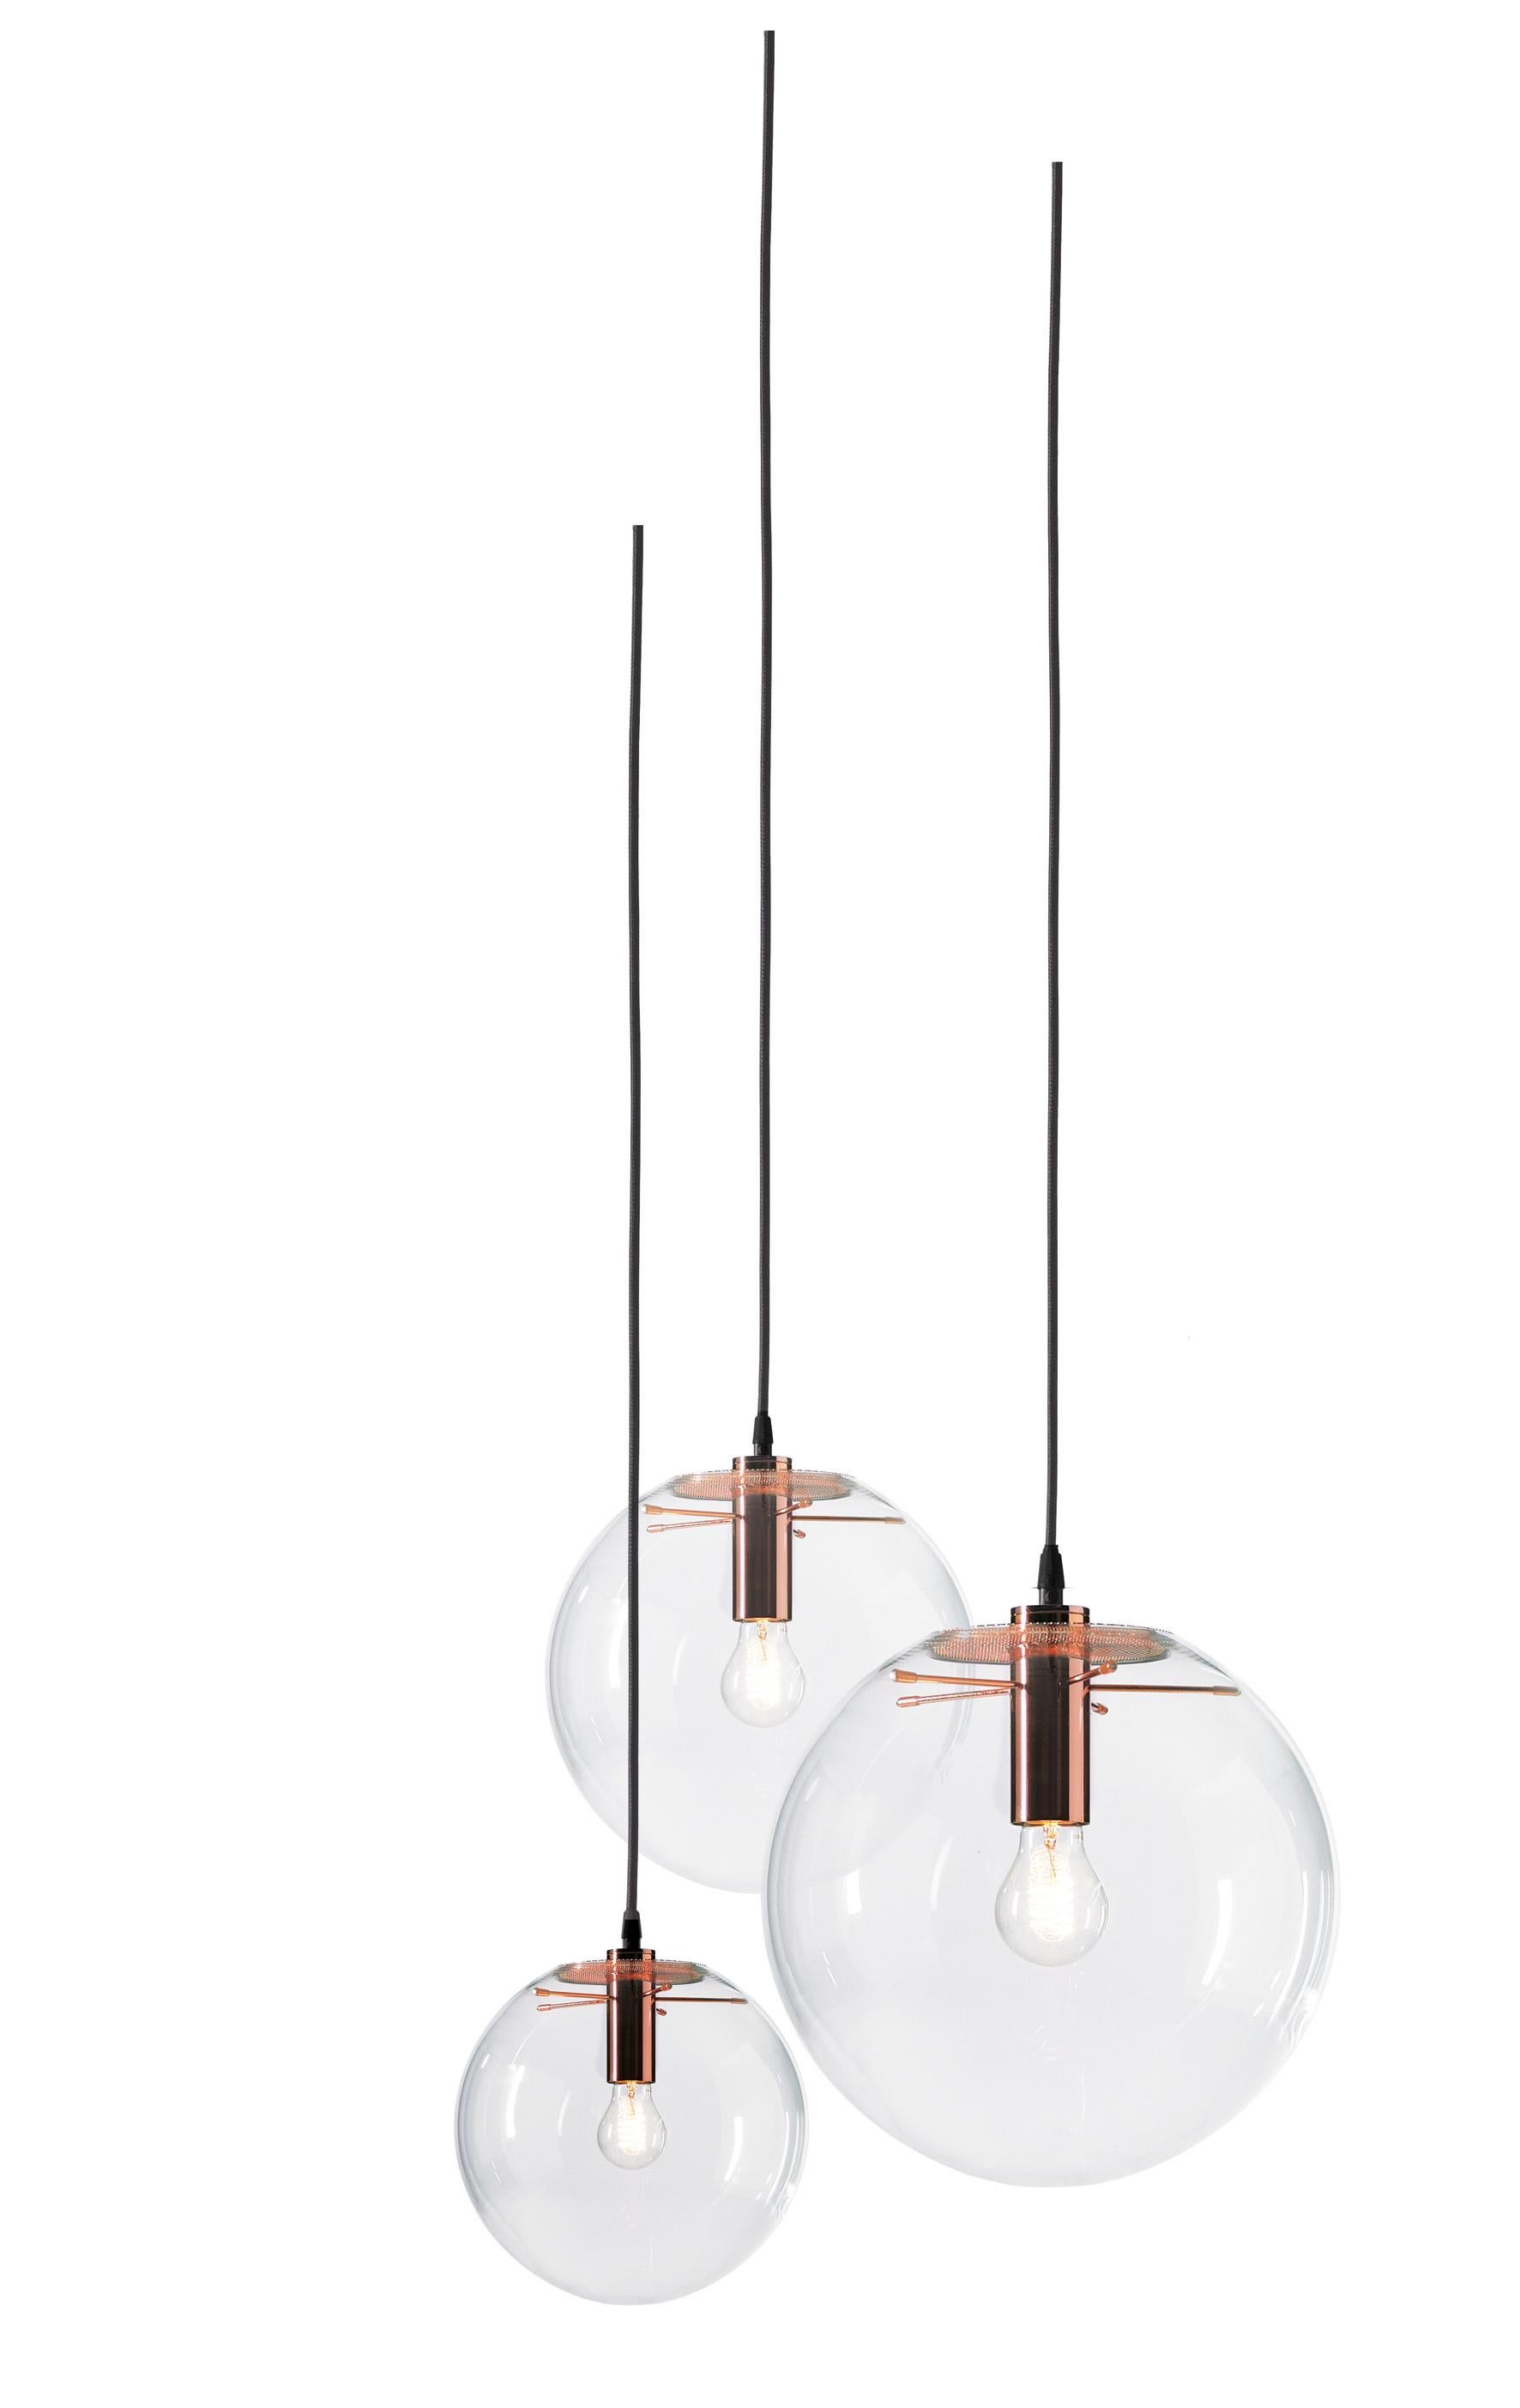 Hand blown clear crystal glass sphere. Centrally suspended by a five-armed light head. Insect protection cover and light head in metal, copper-plated. Black fabric covered wire.

UL version 110 V:
Max. 60 W / 110 V
Socket E 26

Dimensions: W